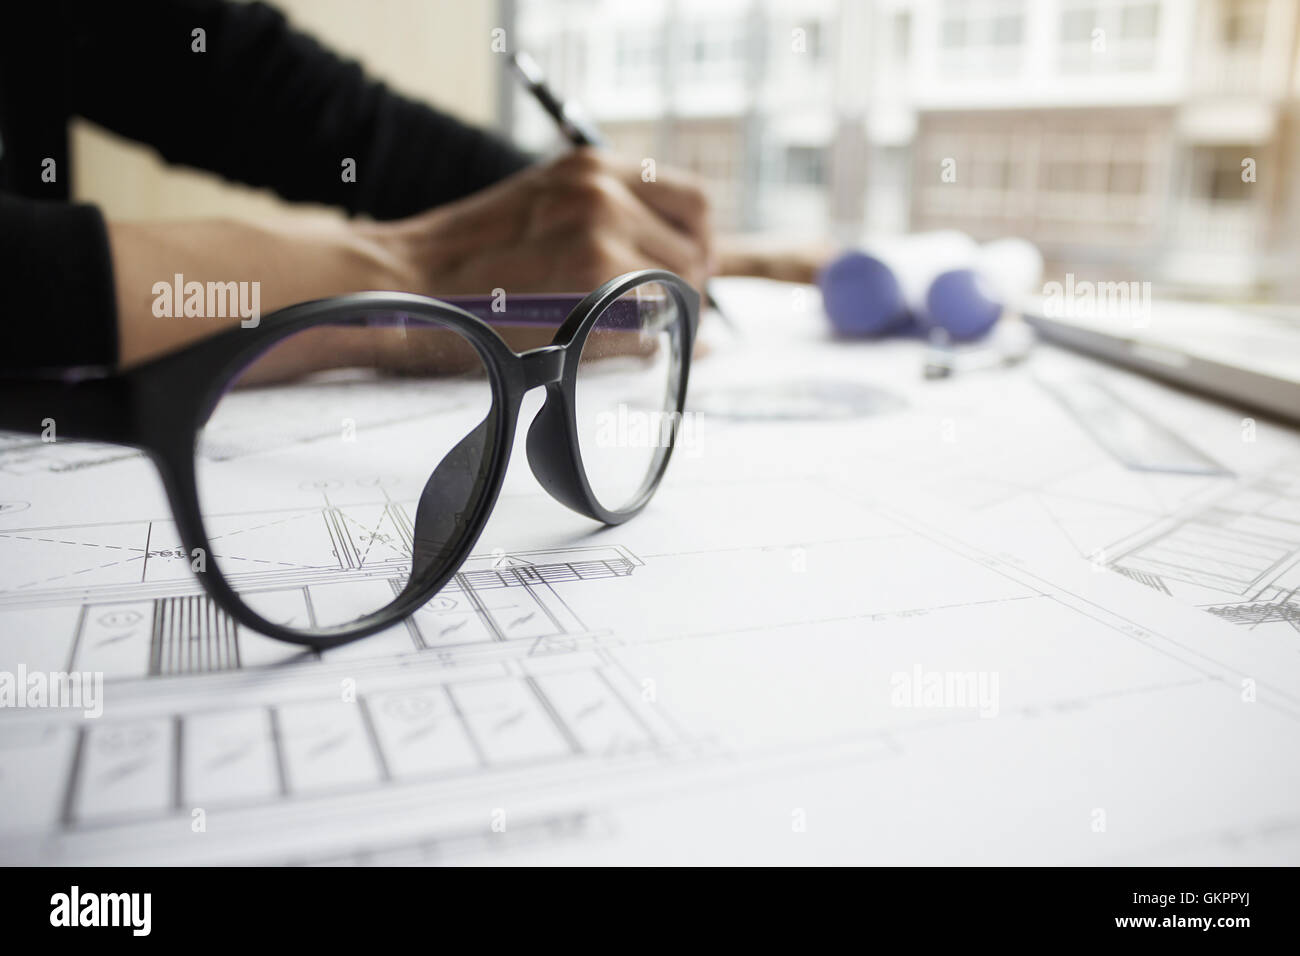 architectural, architecture, associate, blueprint, busy, career, closeup, collaboration, Stock Photo